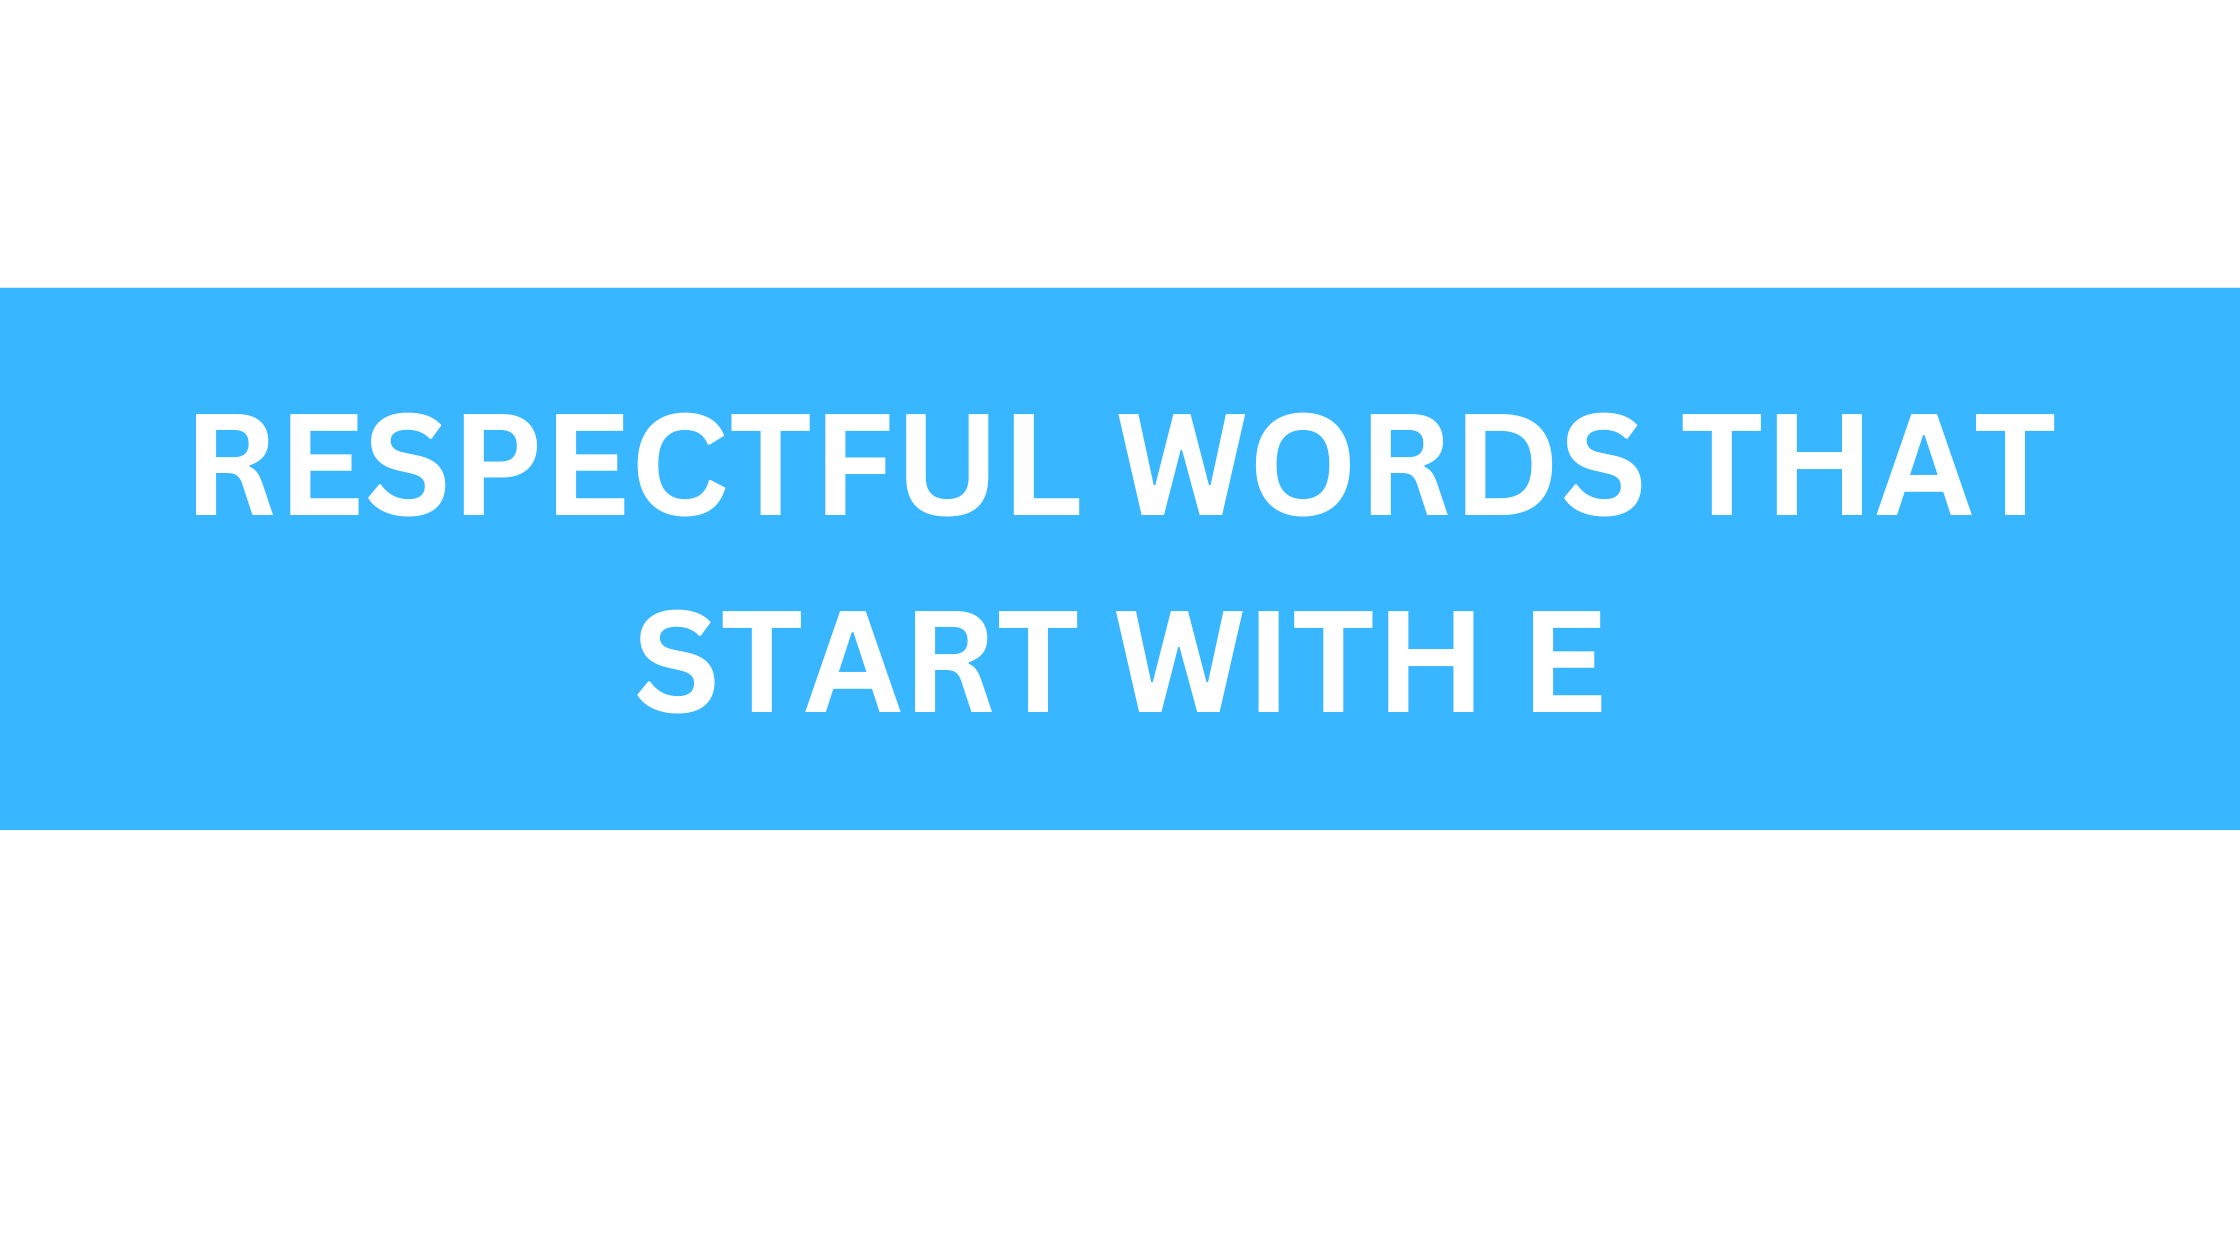 respectful words that start with e